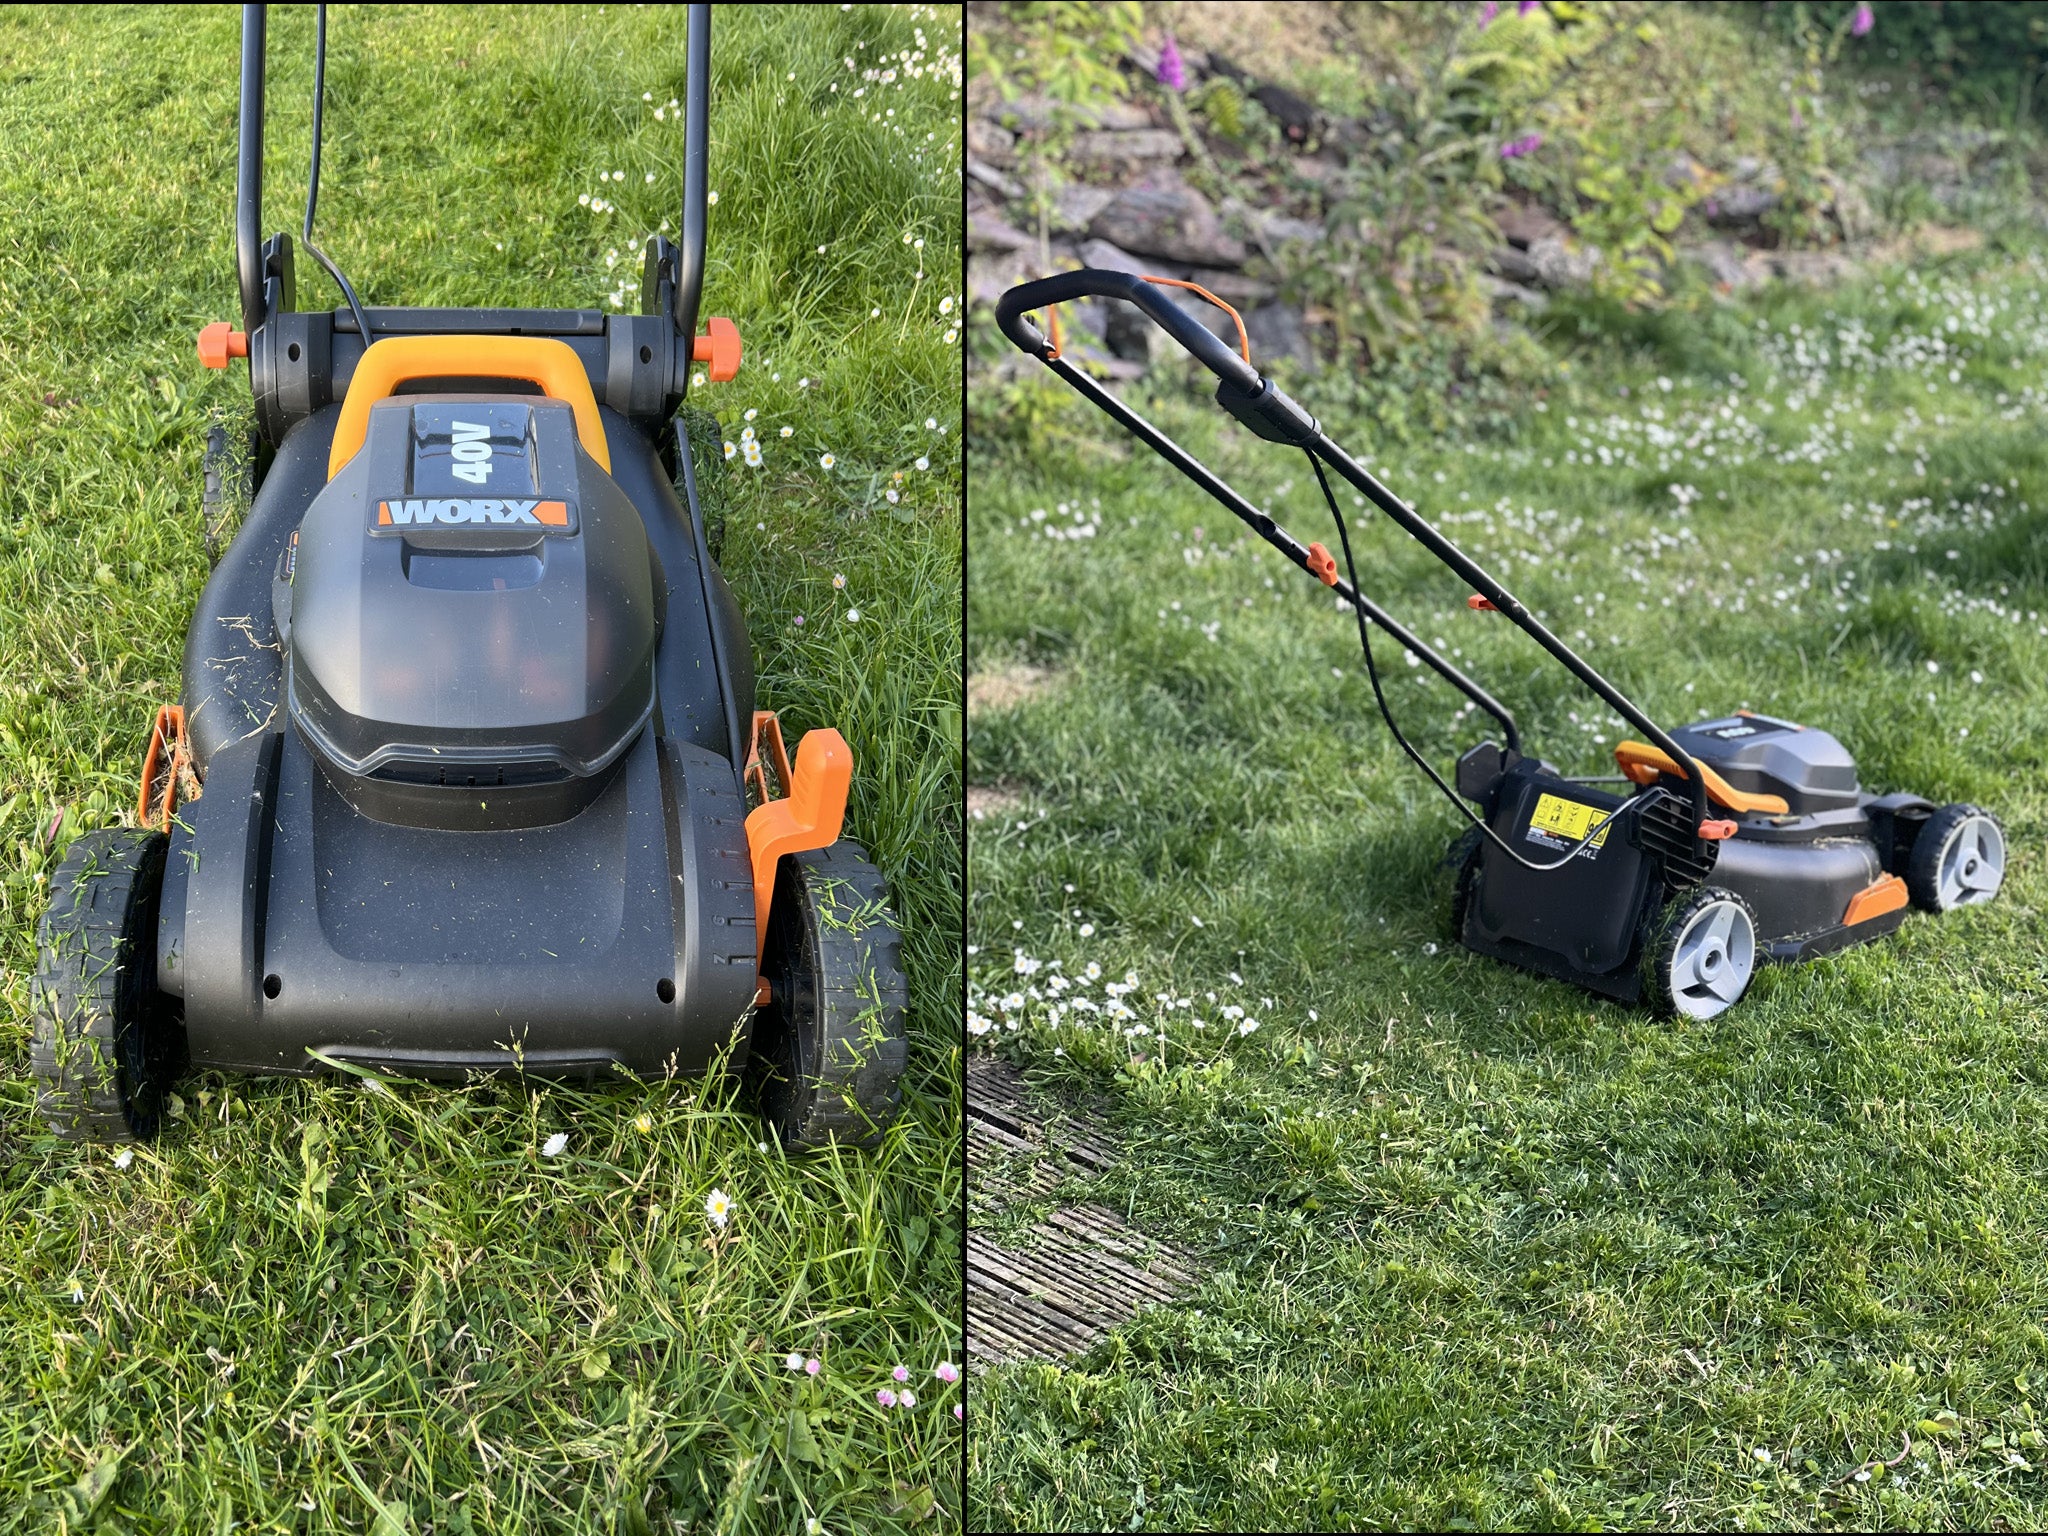 Our reviewer considered ergonomics, manoeuvrability and more while testing a range of lawnmowers